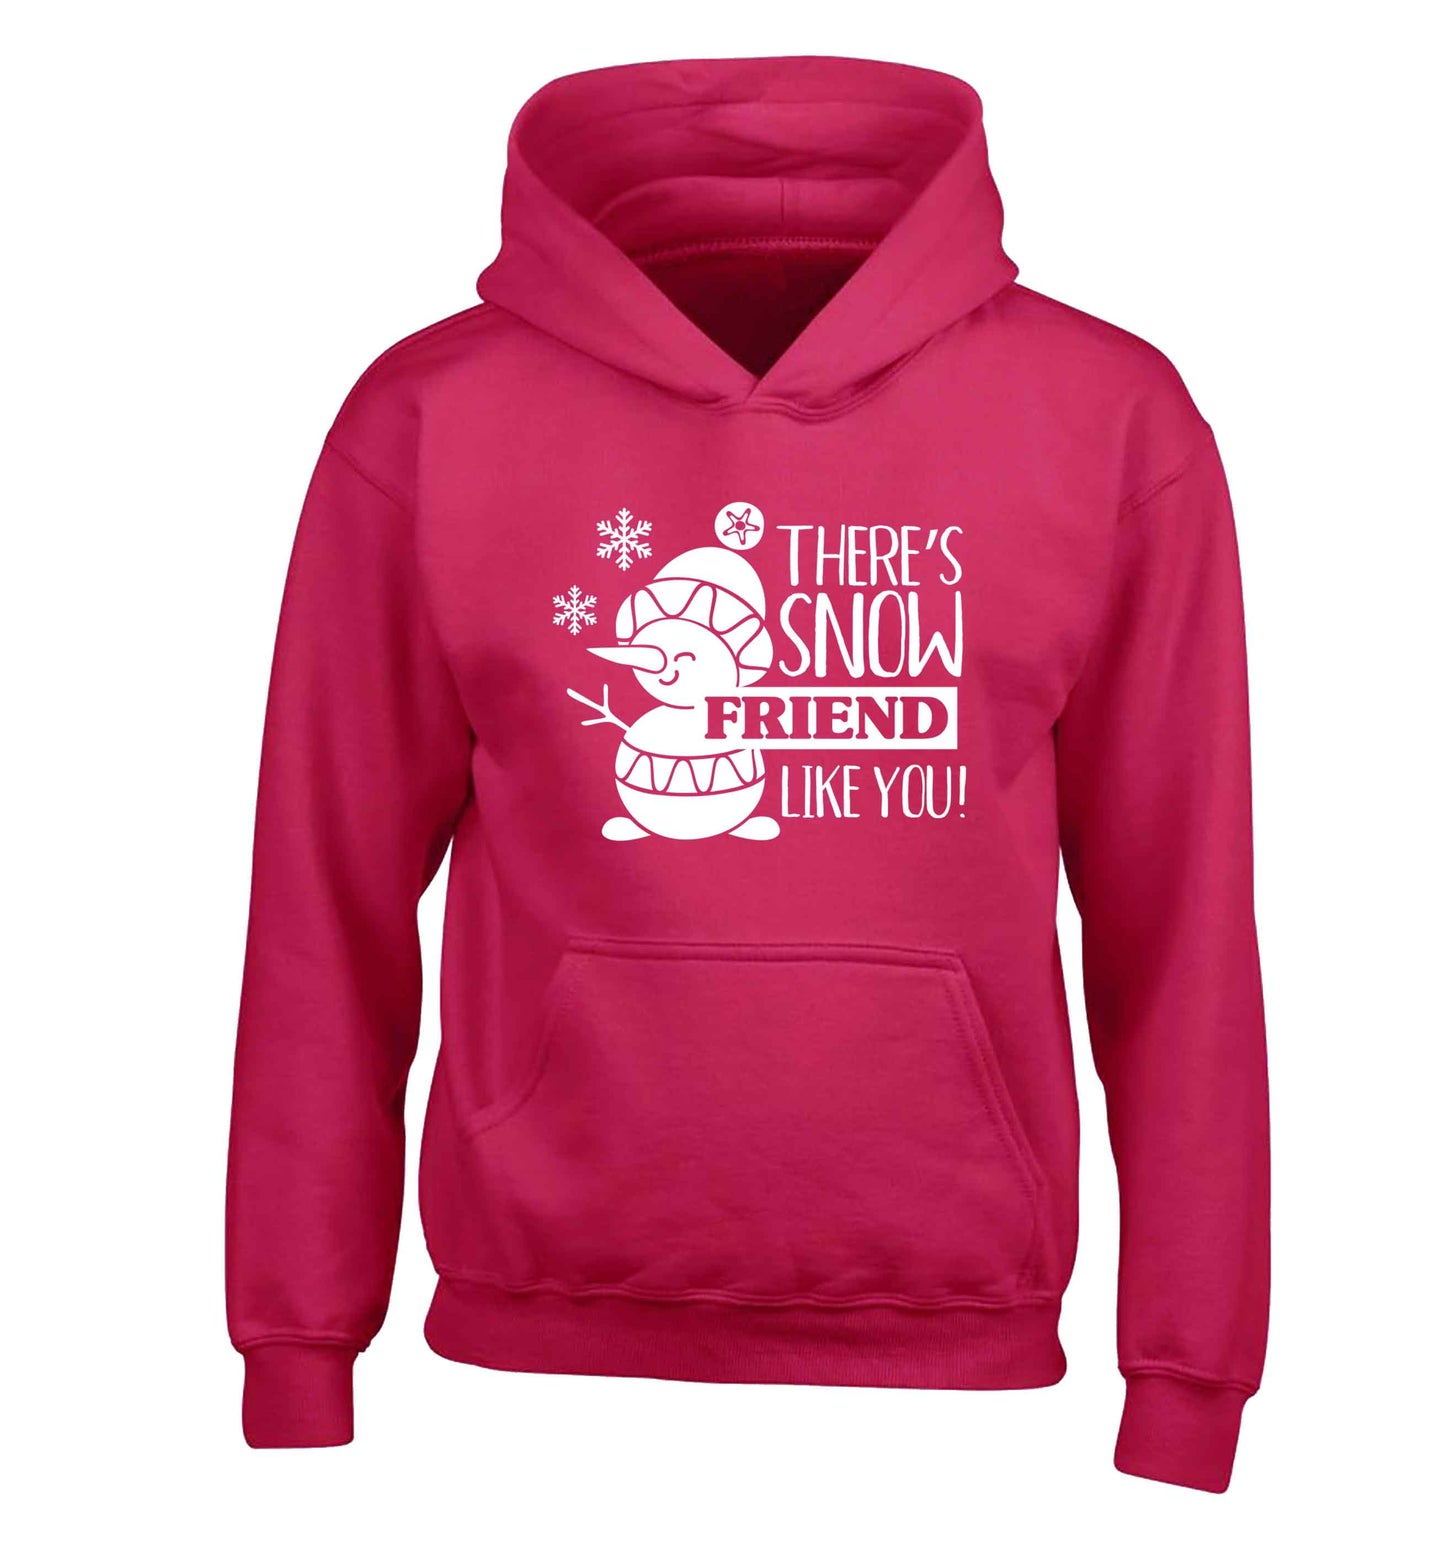 There's snow friend like you children's pink hoodie 12-13 Years